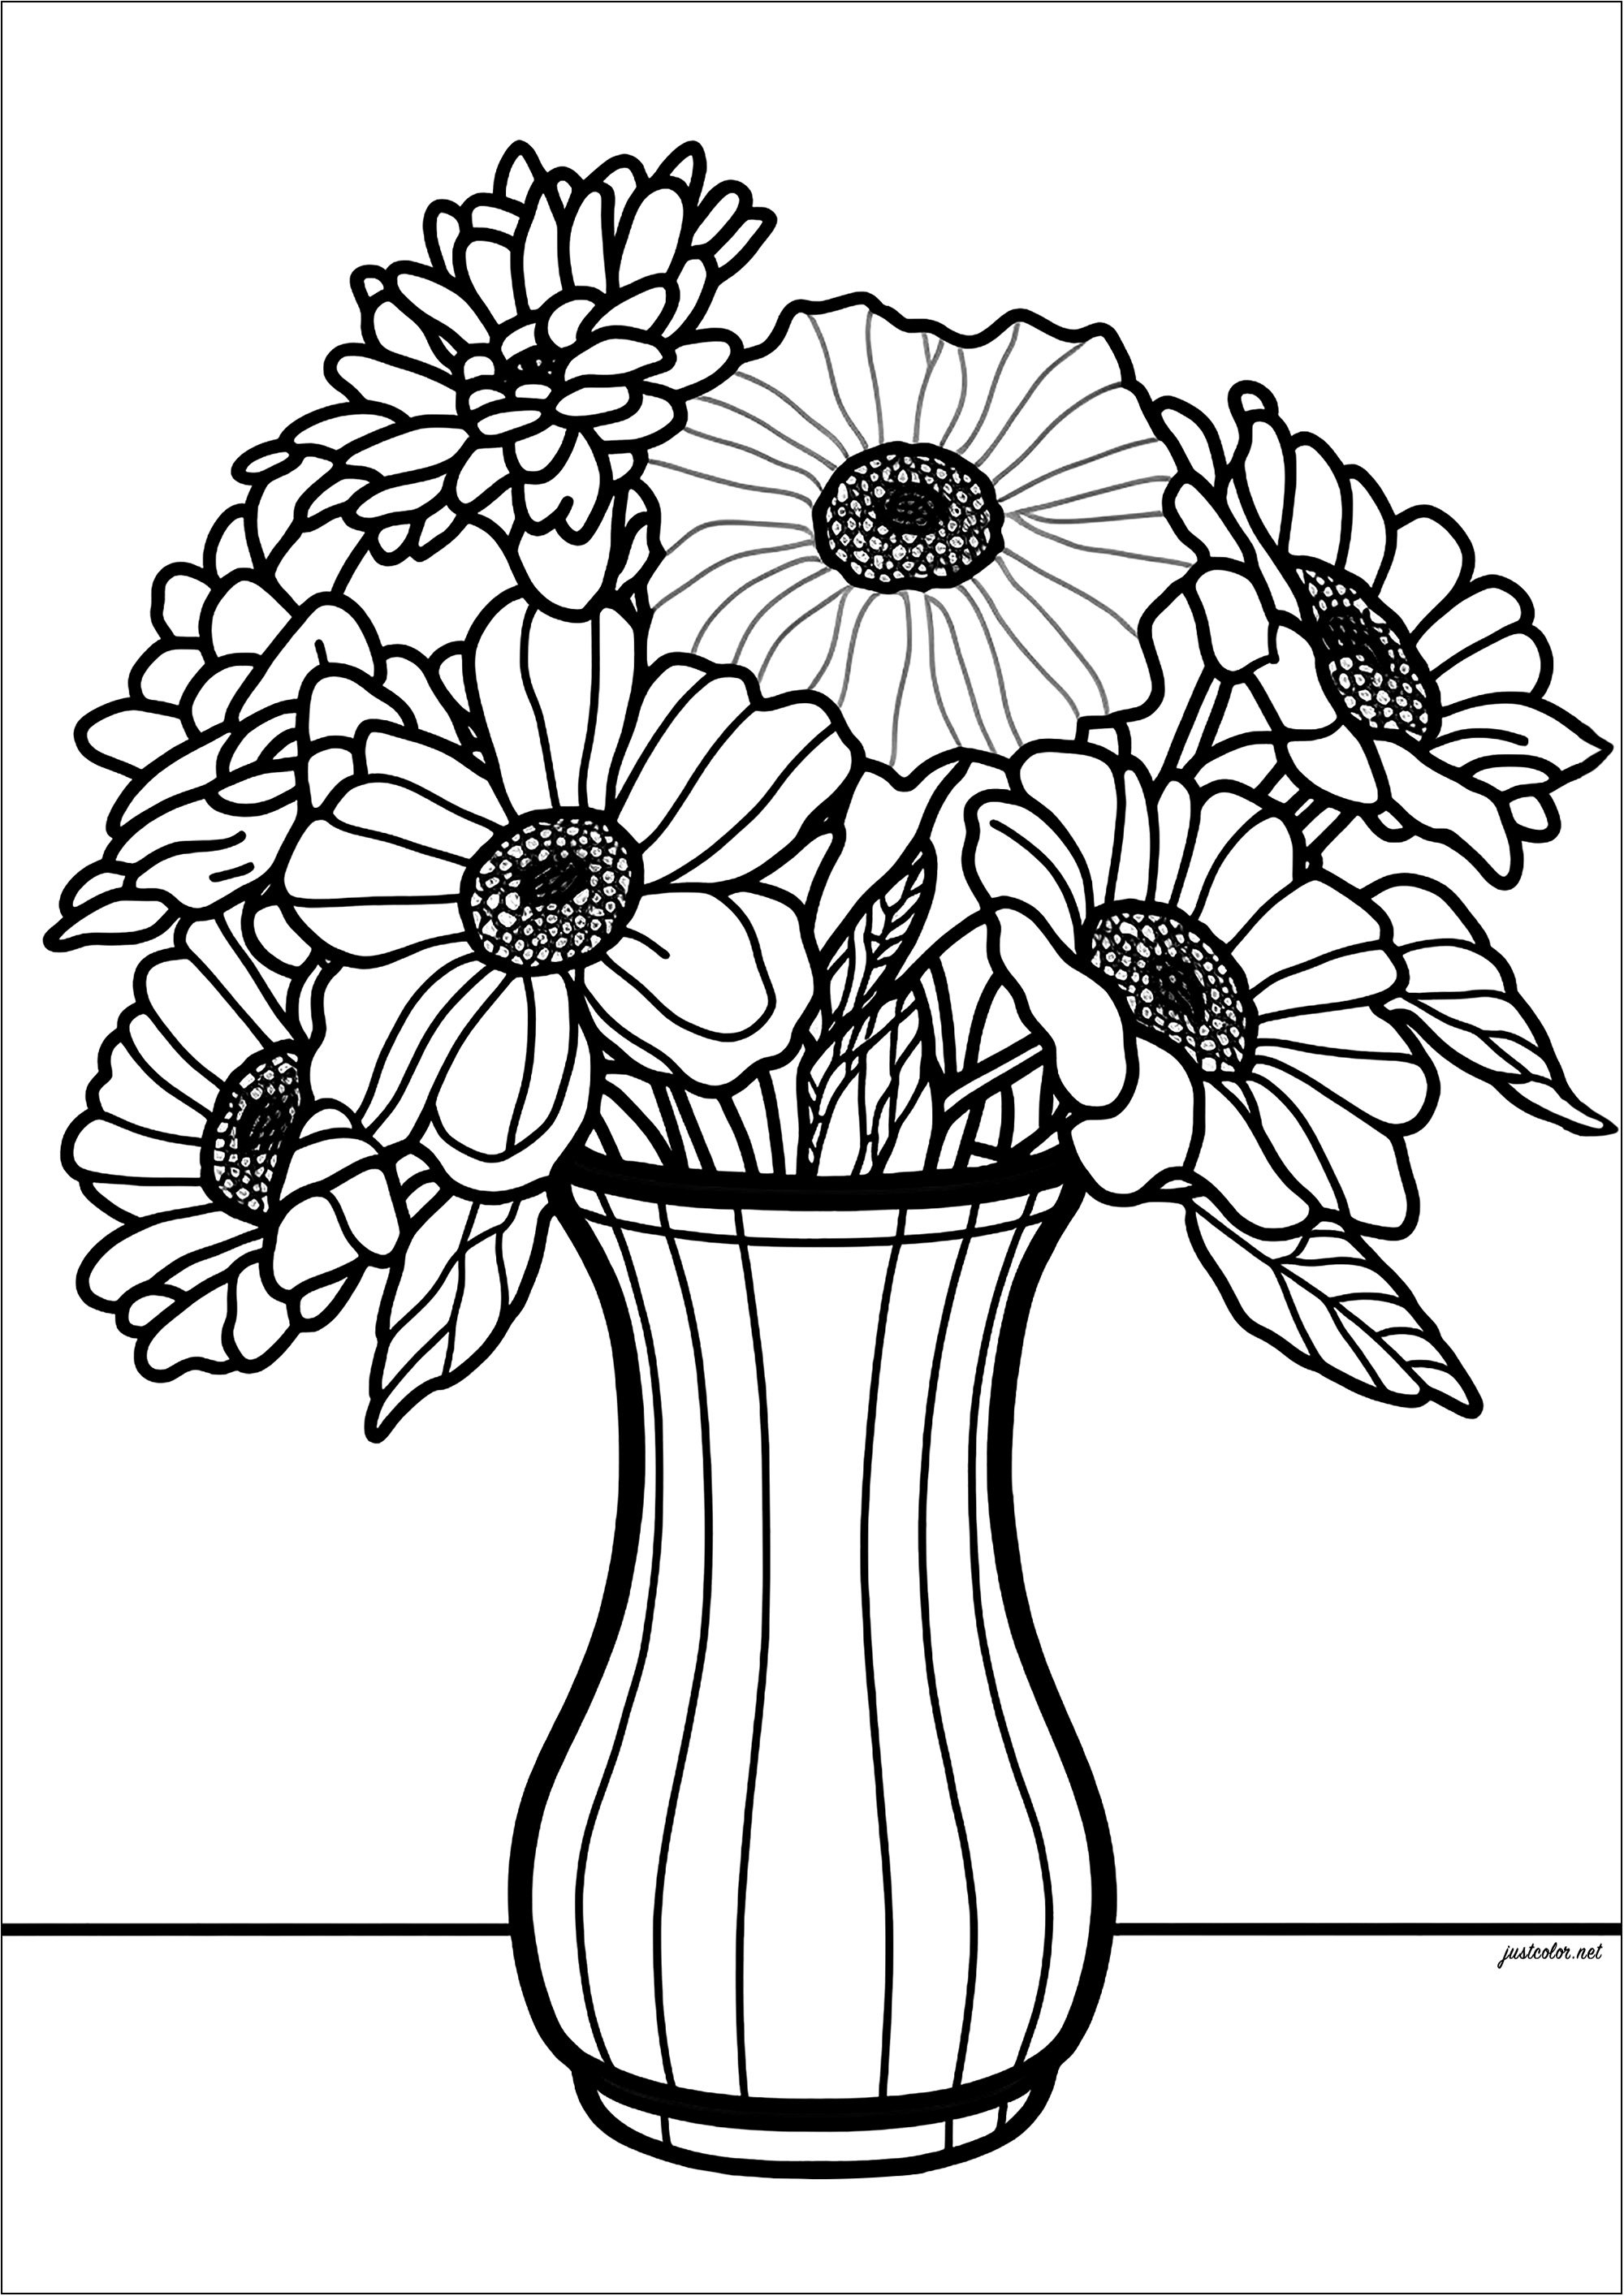 Flowers with thick lines, in a beautiful vase. Thick lines. With your colors, this coloring page will be a real wonder for the eyes. It is perfect for children and adults who want to escape into a world of color and beauty.